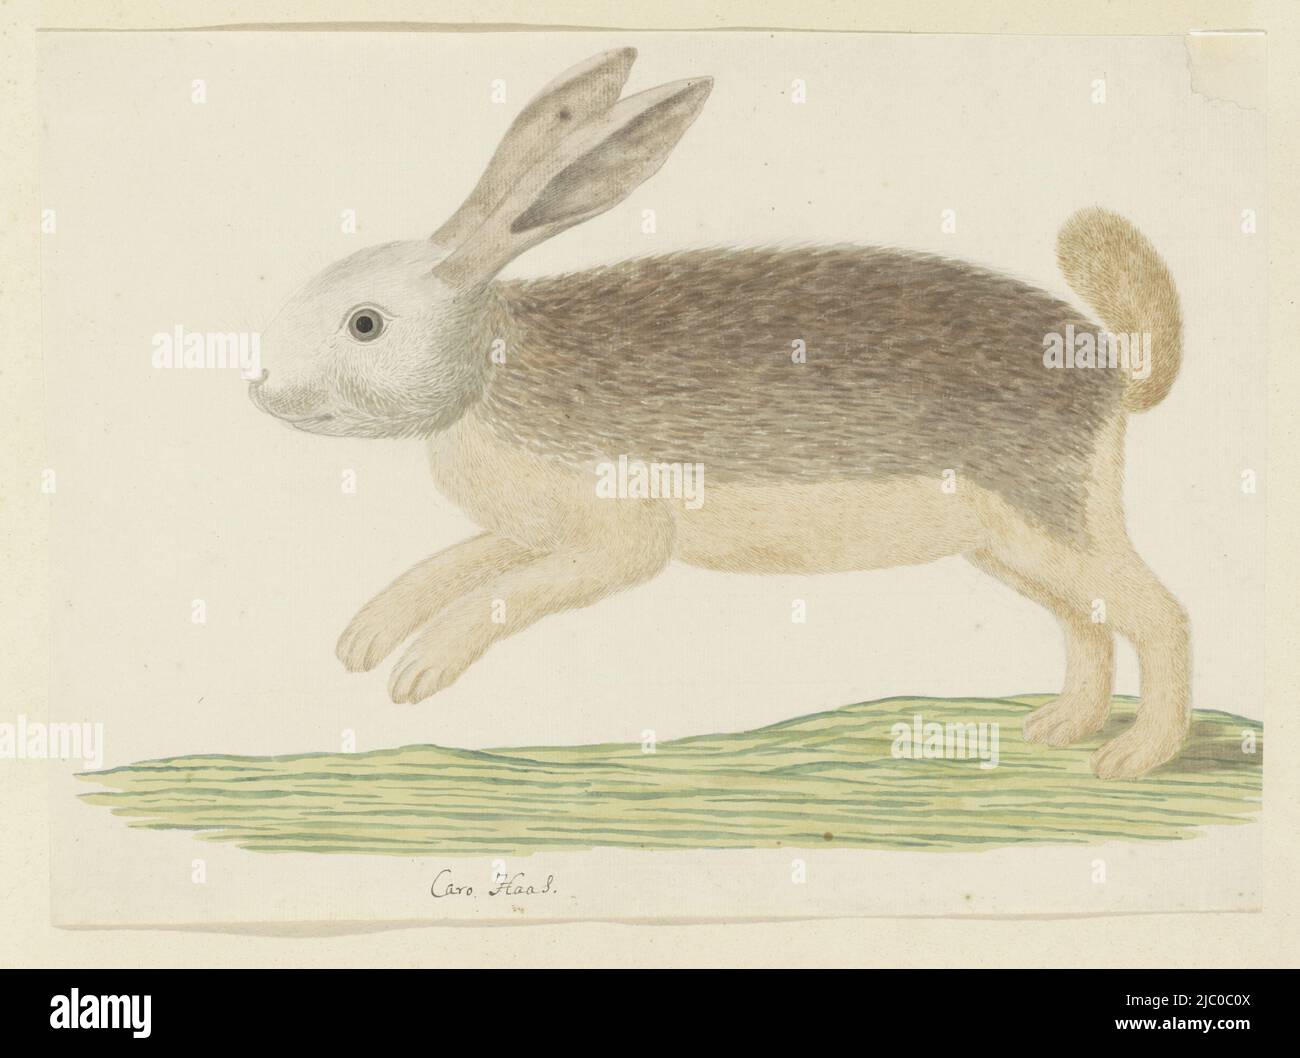 A Karoo hare (named by Gordon), lepus sp.(?), cannot be determined with certainty, Pronolagus sp. (Karoo hare), draughtsman: Robert Jacob Gordon, Oct-1777 - Mar-1786, paper, pen, brush, h 660 mm × w 480 mm, h 267 mm × w 369 mm Stock Photo